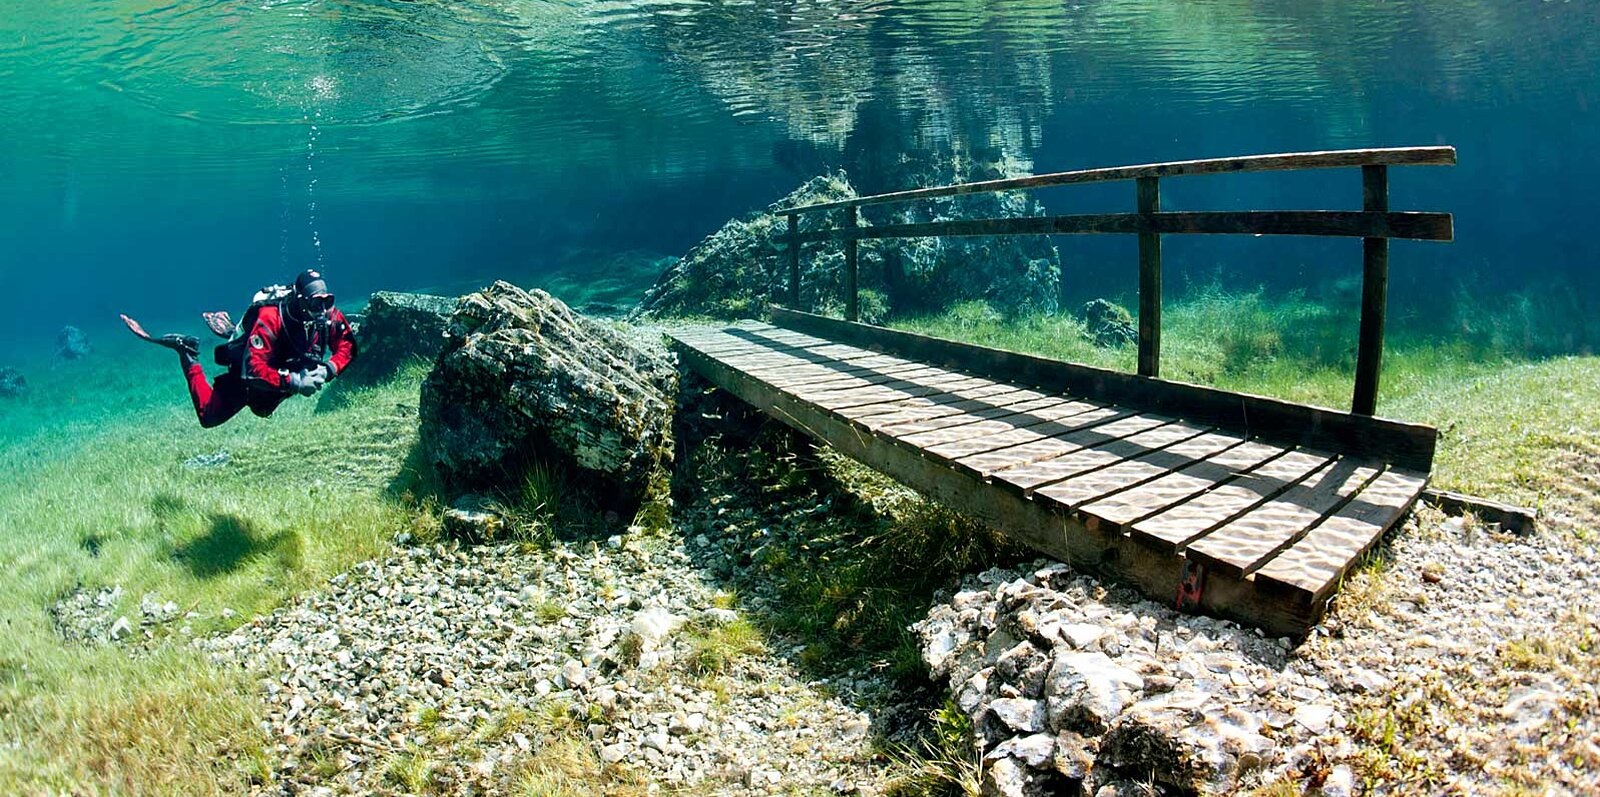 Diving in the lakes of Austria